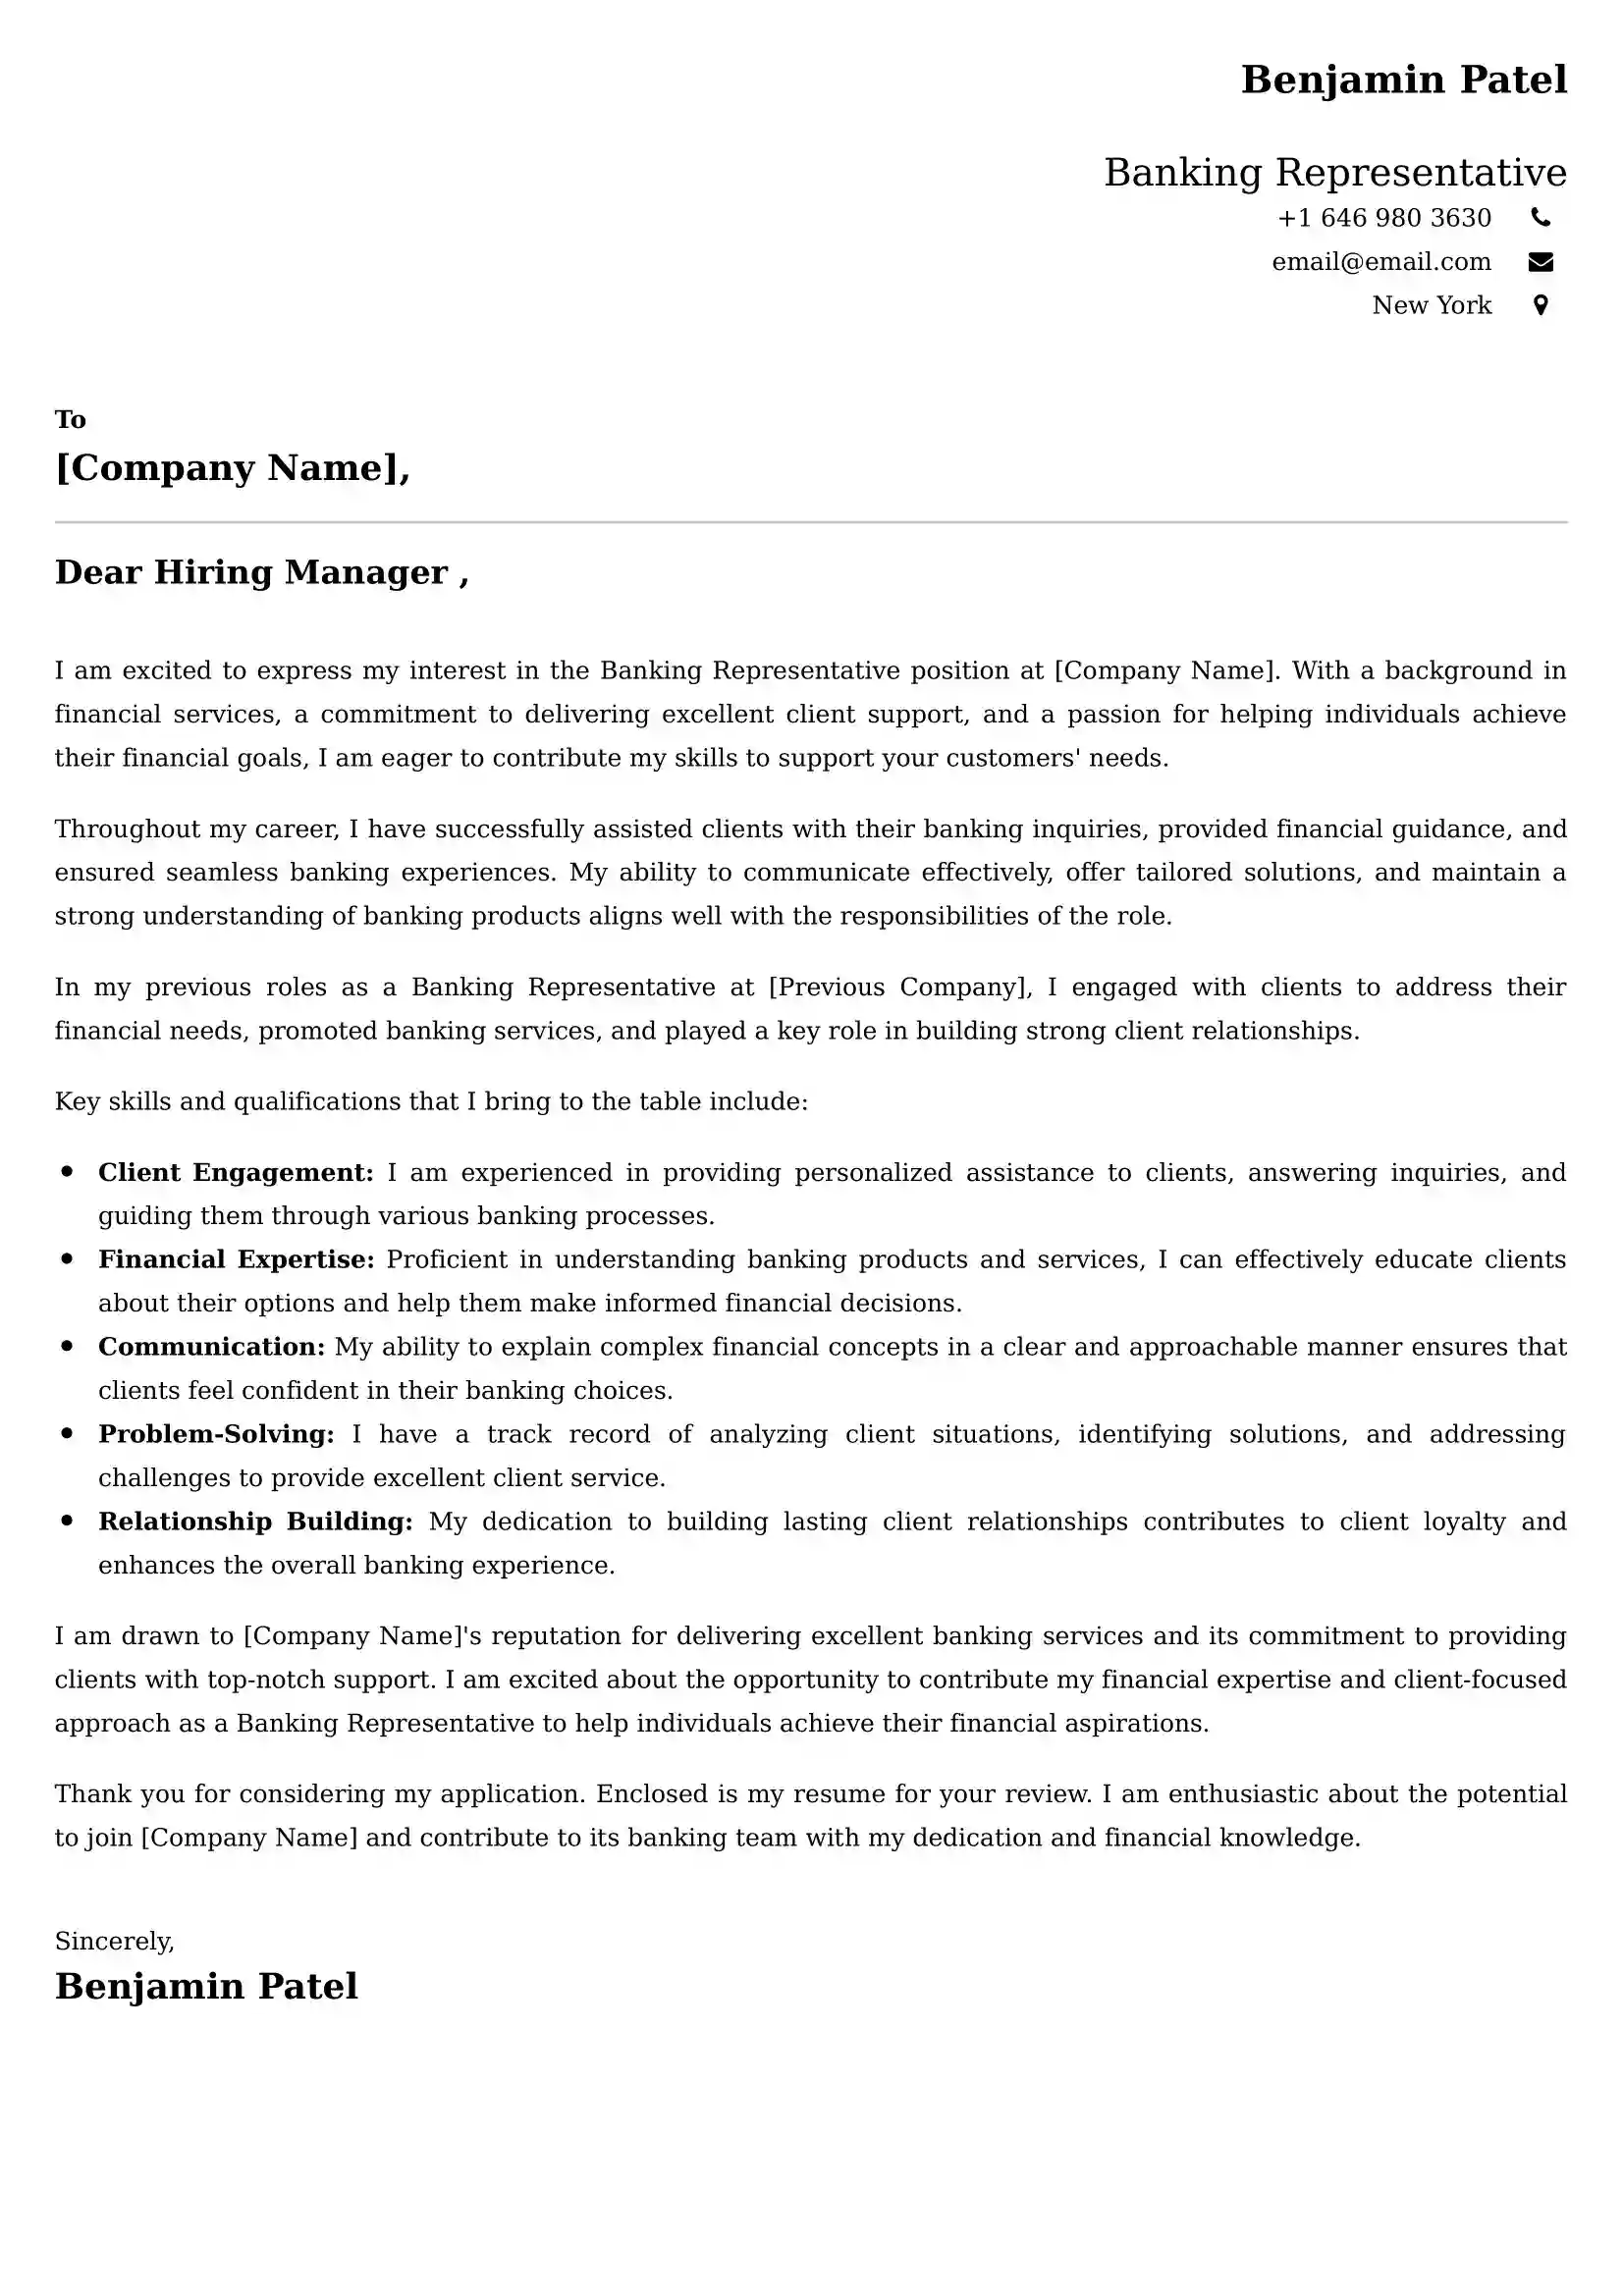 Banking Representative Cover Letter Samples Malaysia